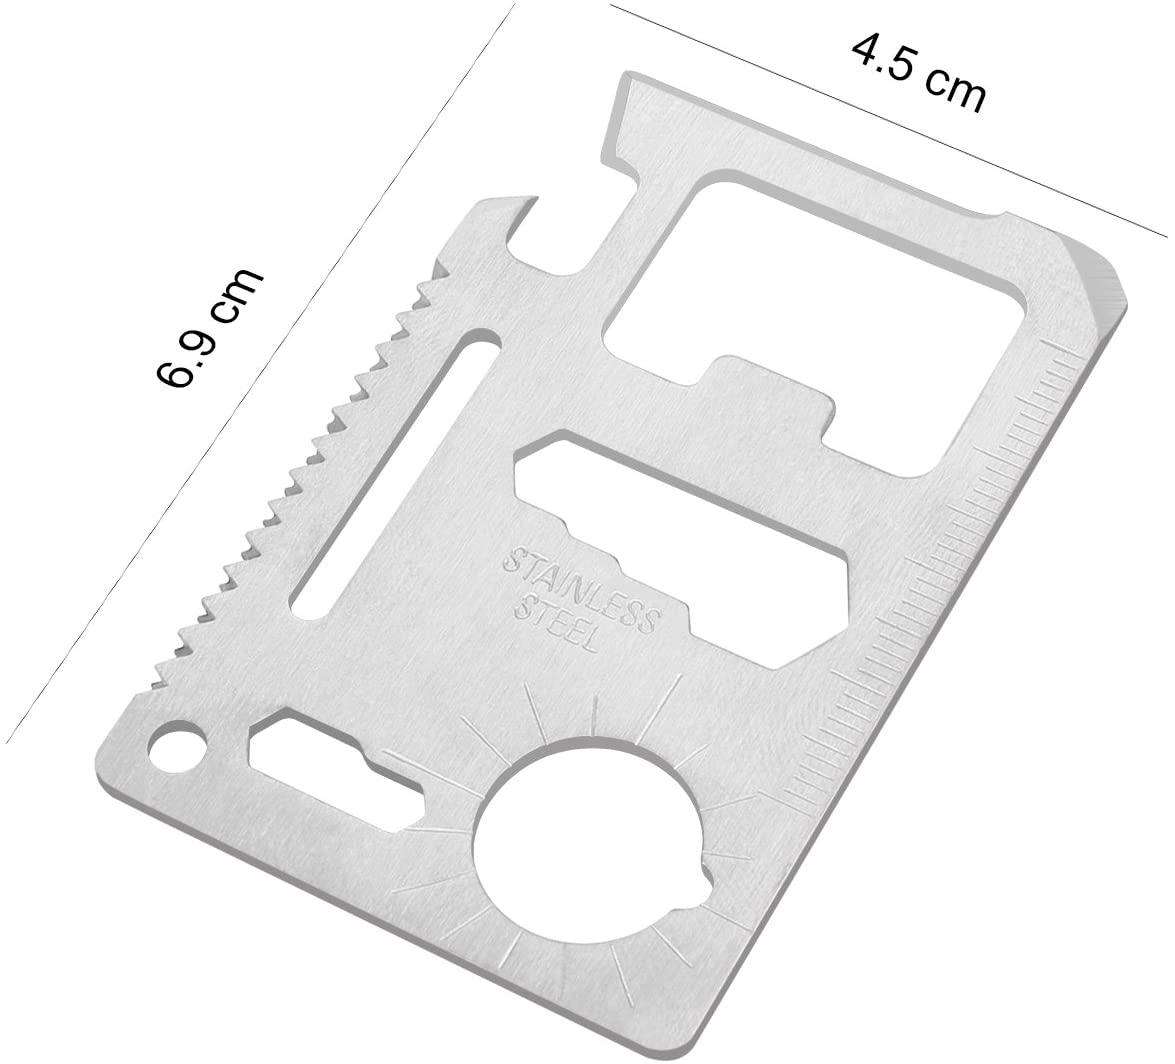 11 in 1 Stainless Steel Survival Card Tool - American Legend Rider